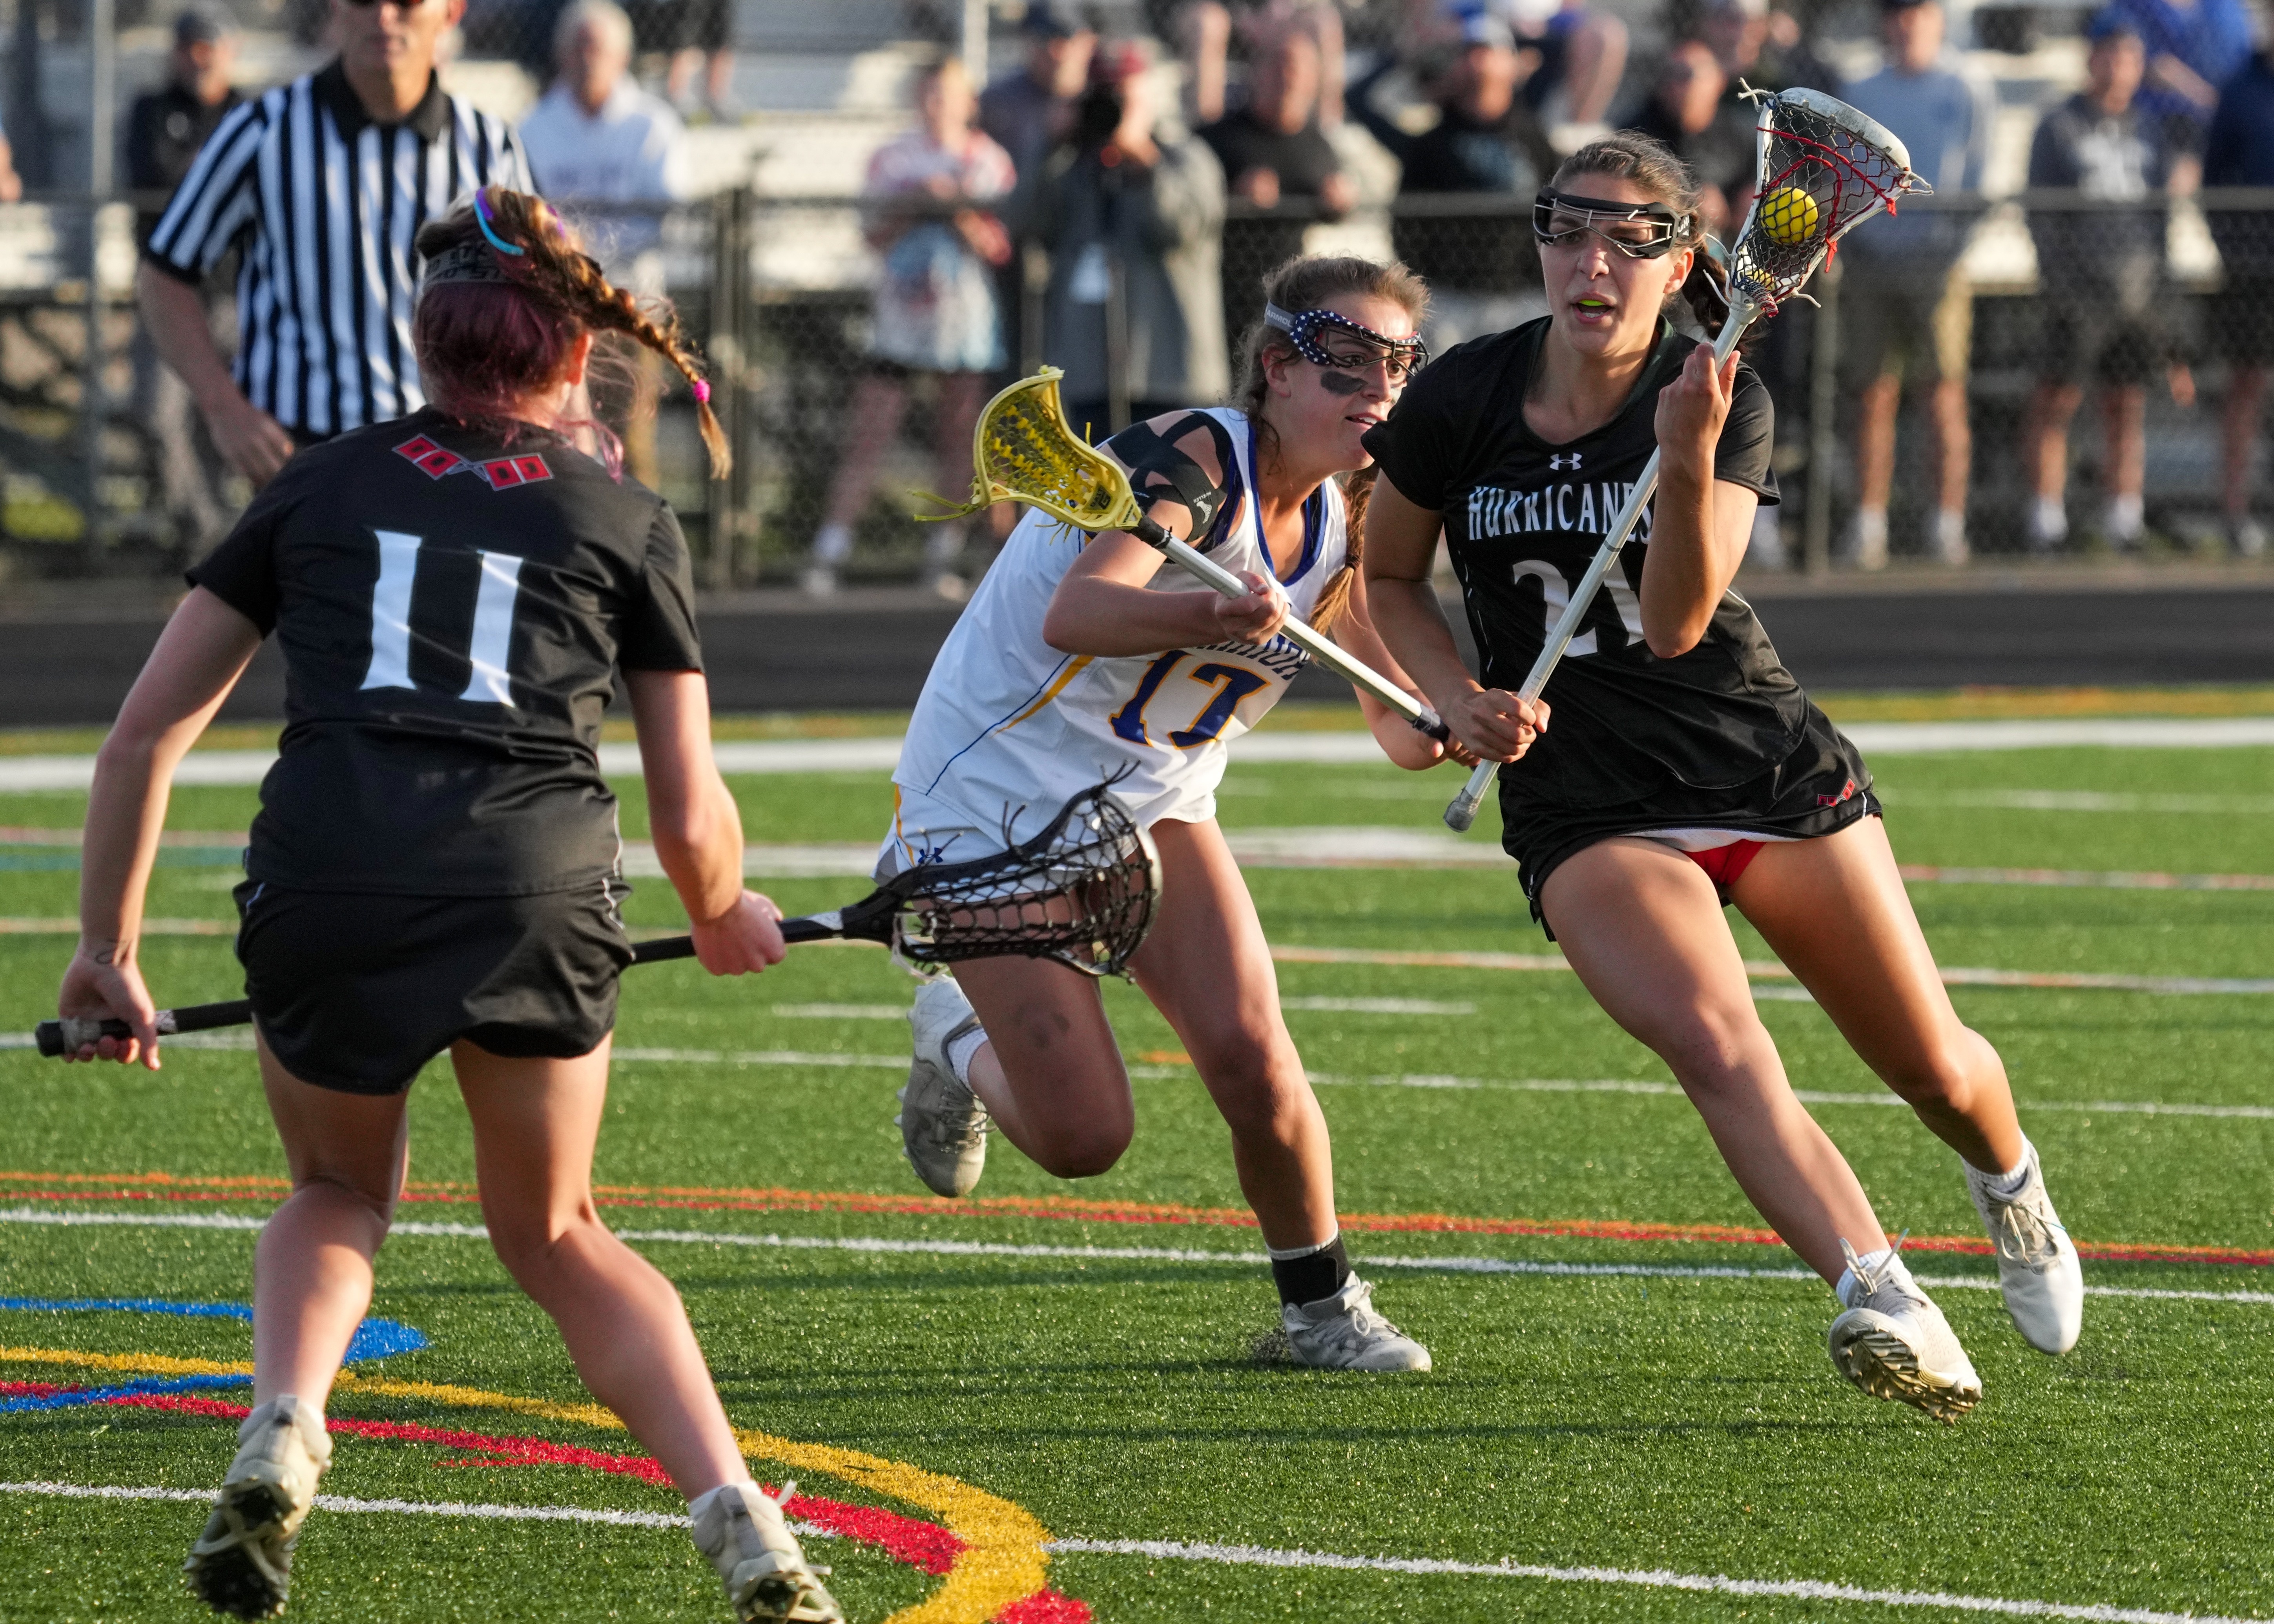 Senior co-captain Reilly Mahon, a midfielder and defender, carries the ball into Comsewogue's zone during her team's Suffolk County Class B championship win last season. RON ESPOSITO